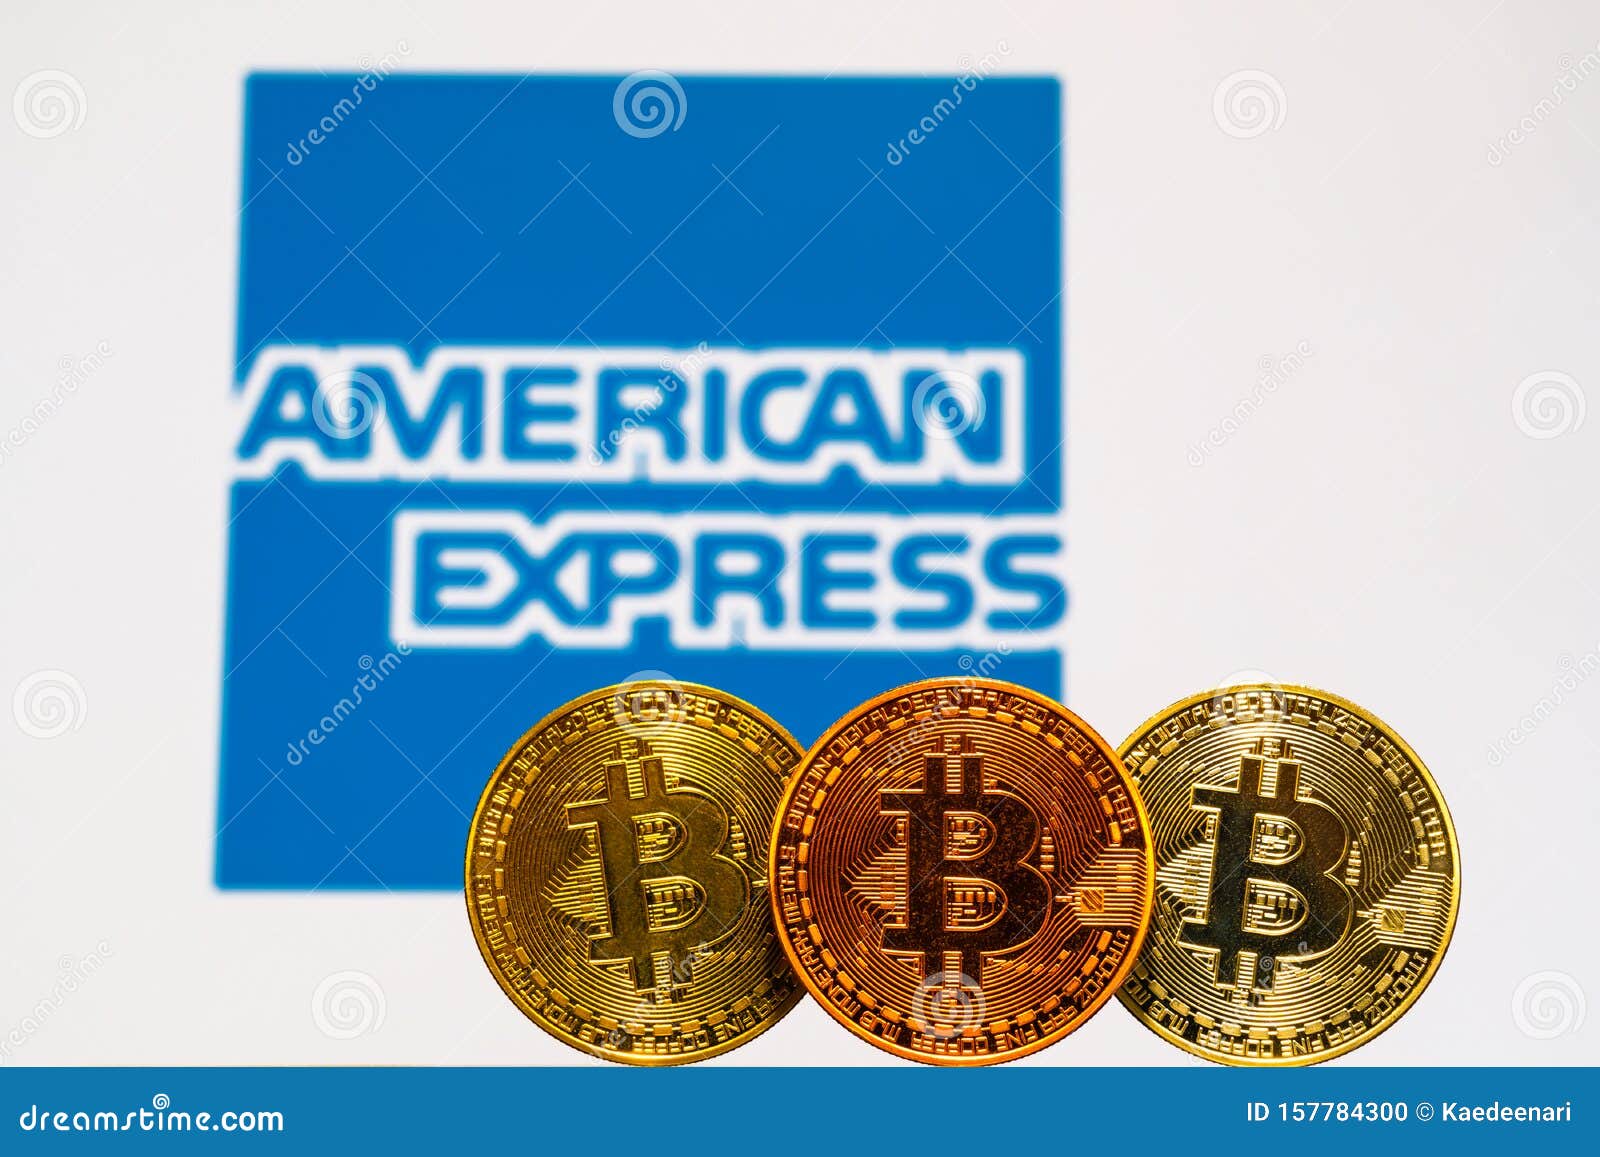 Best Crypto Exchanges That Accept American Express [AMEX] in 